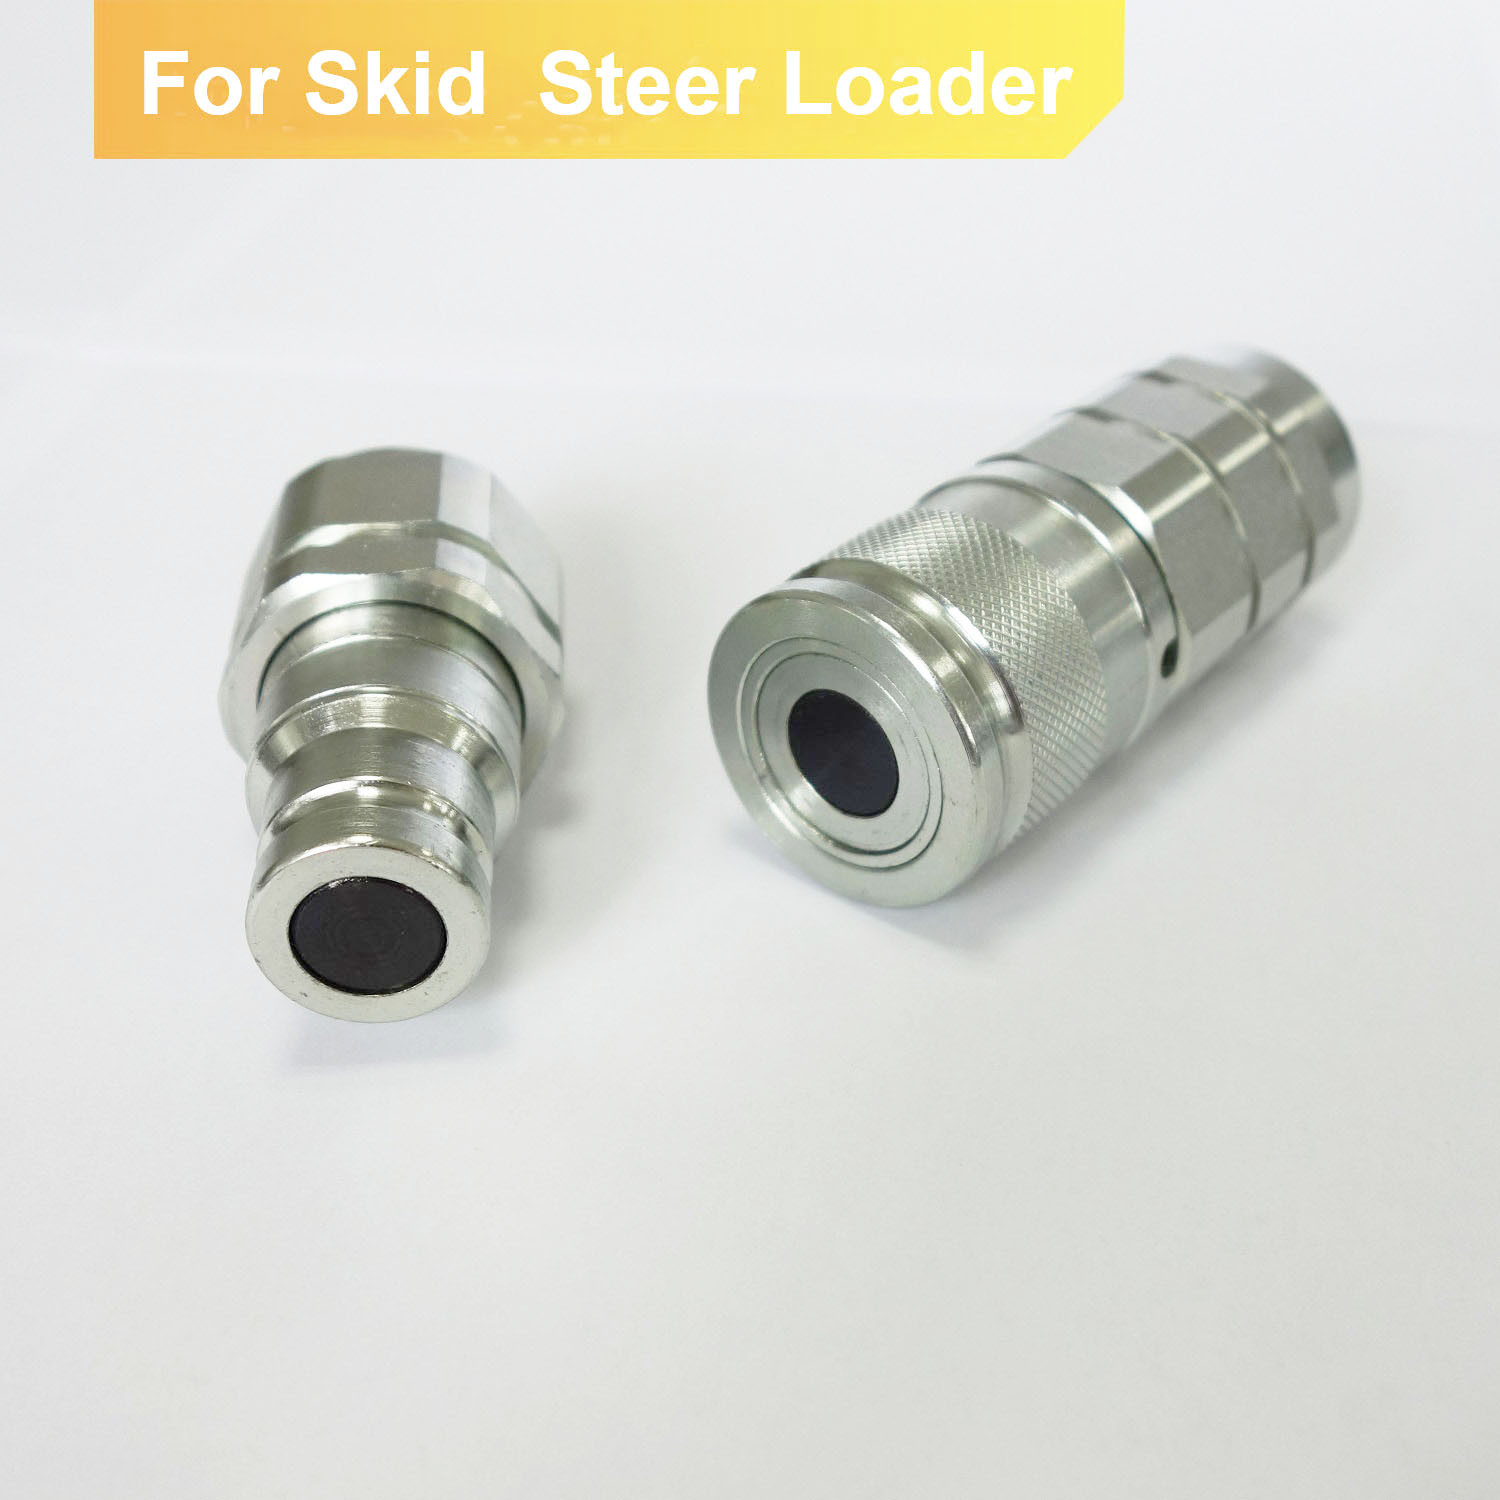 SAE / Bsp/ NPT Thread Skid Steer Loader Coupler Nipple ISO16028 Quick Connector Coupling